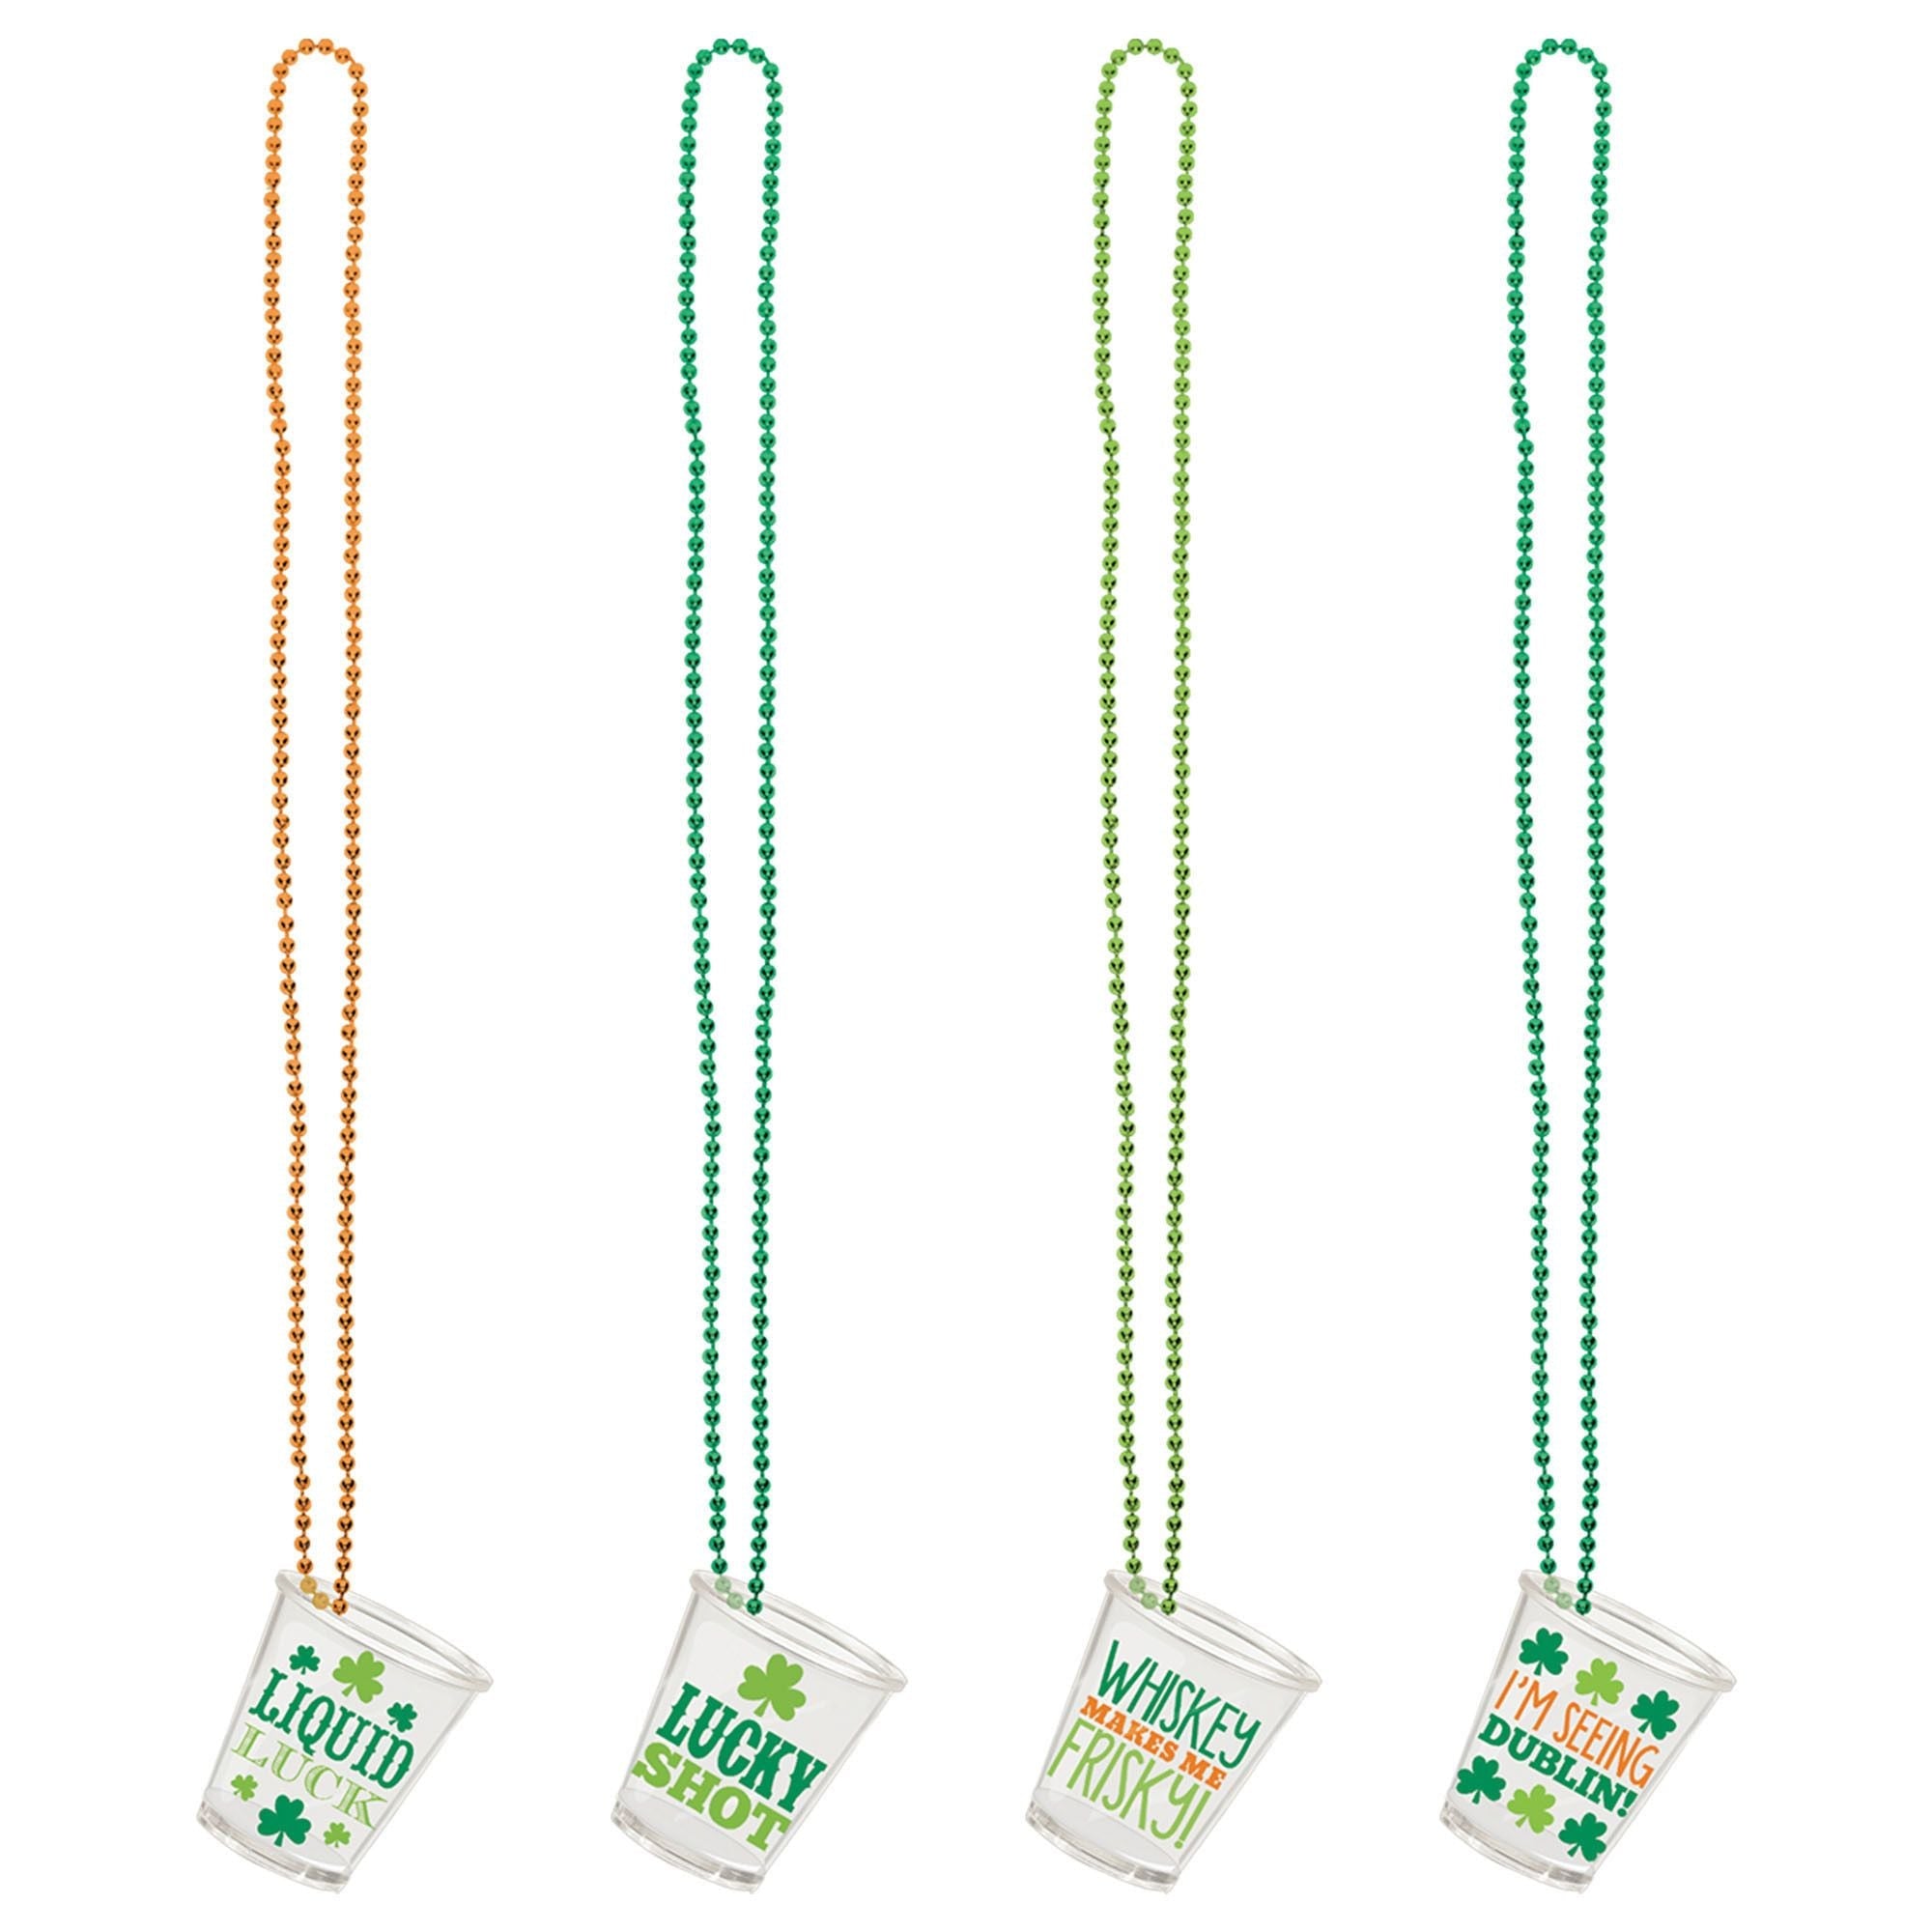 Amscan HOLIDAY: ST. PAT'S Shot Glasses on a Chain